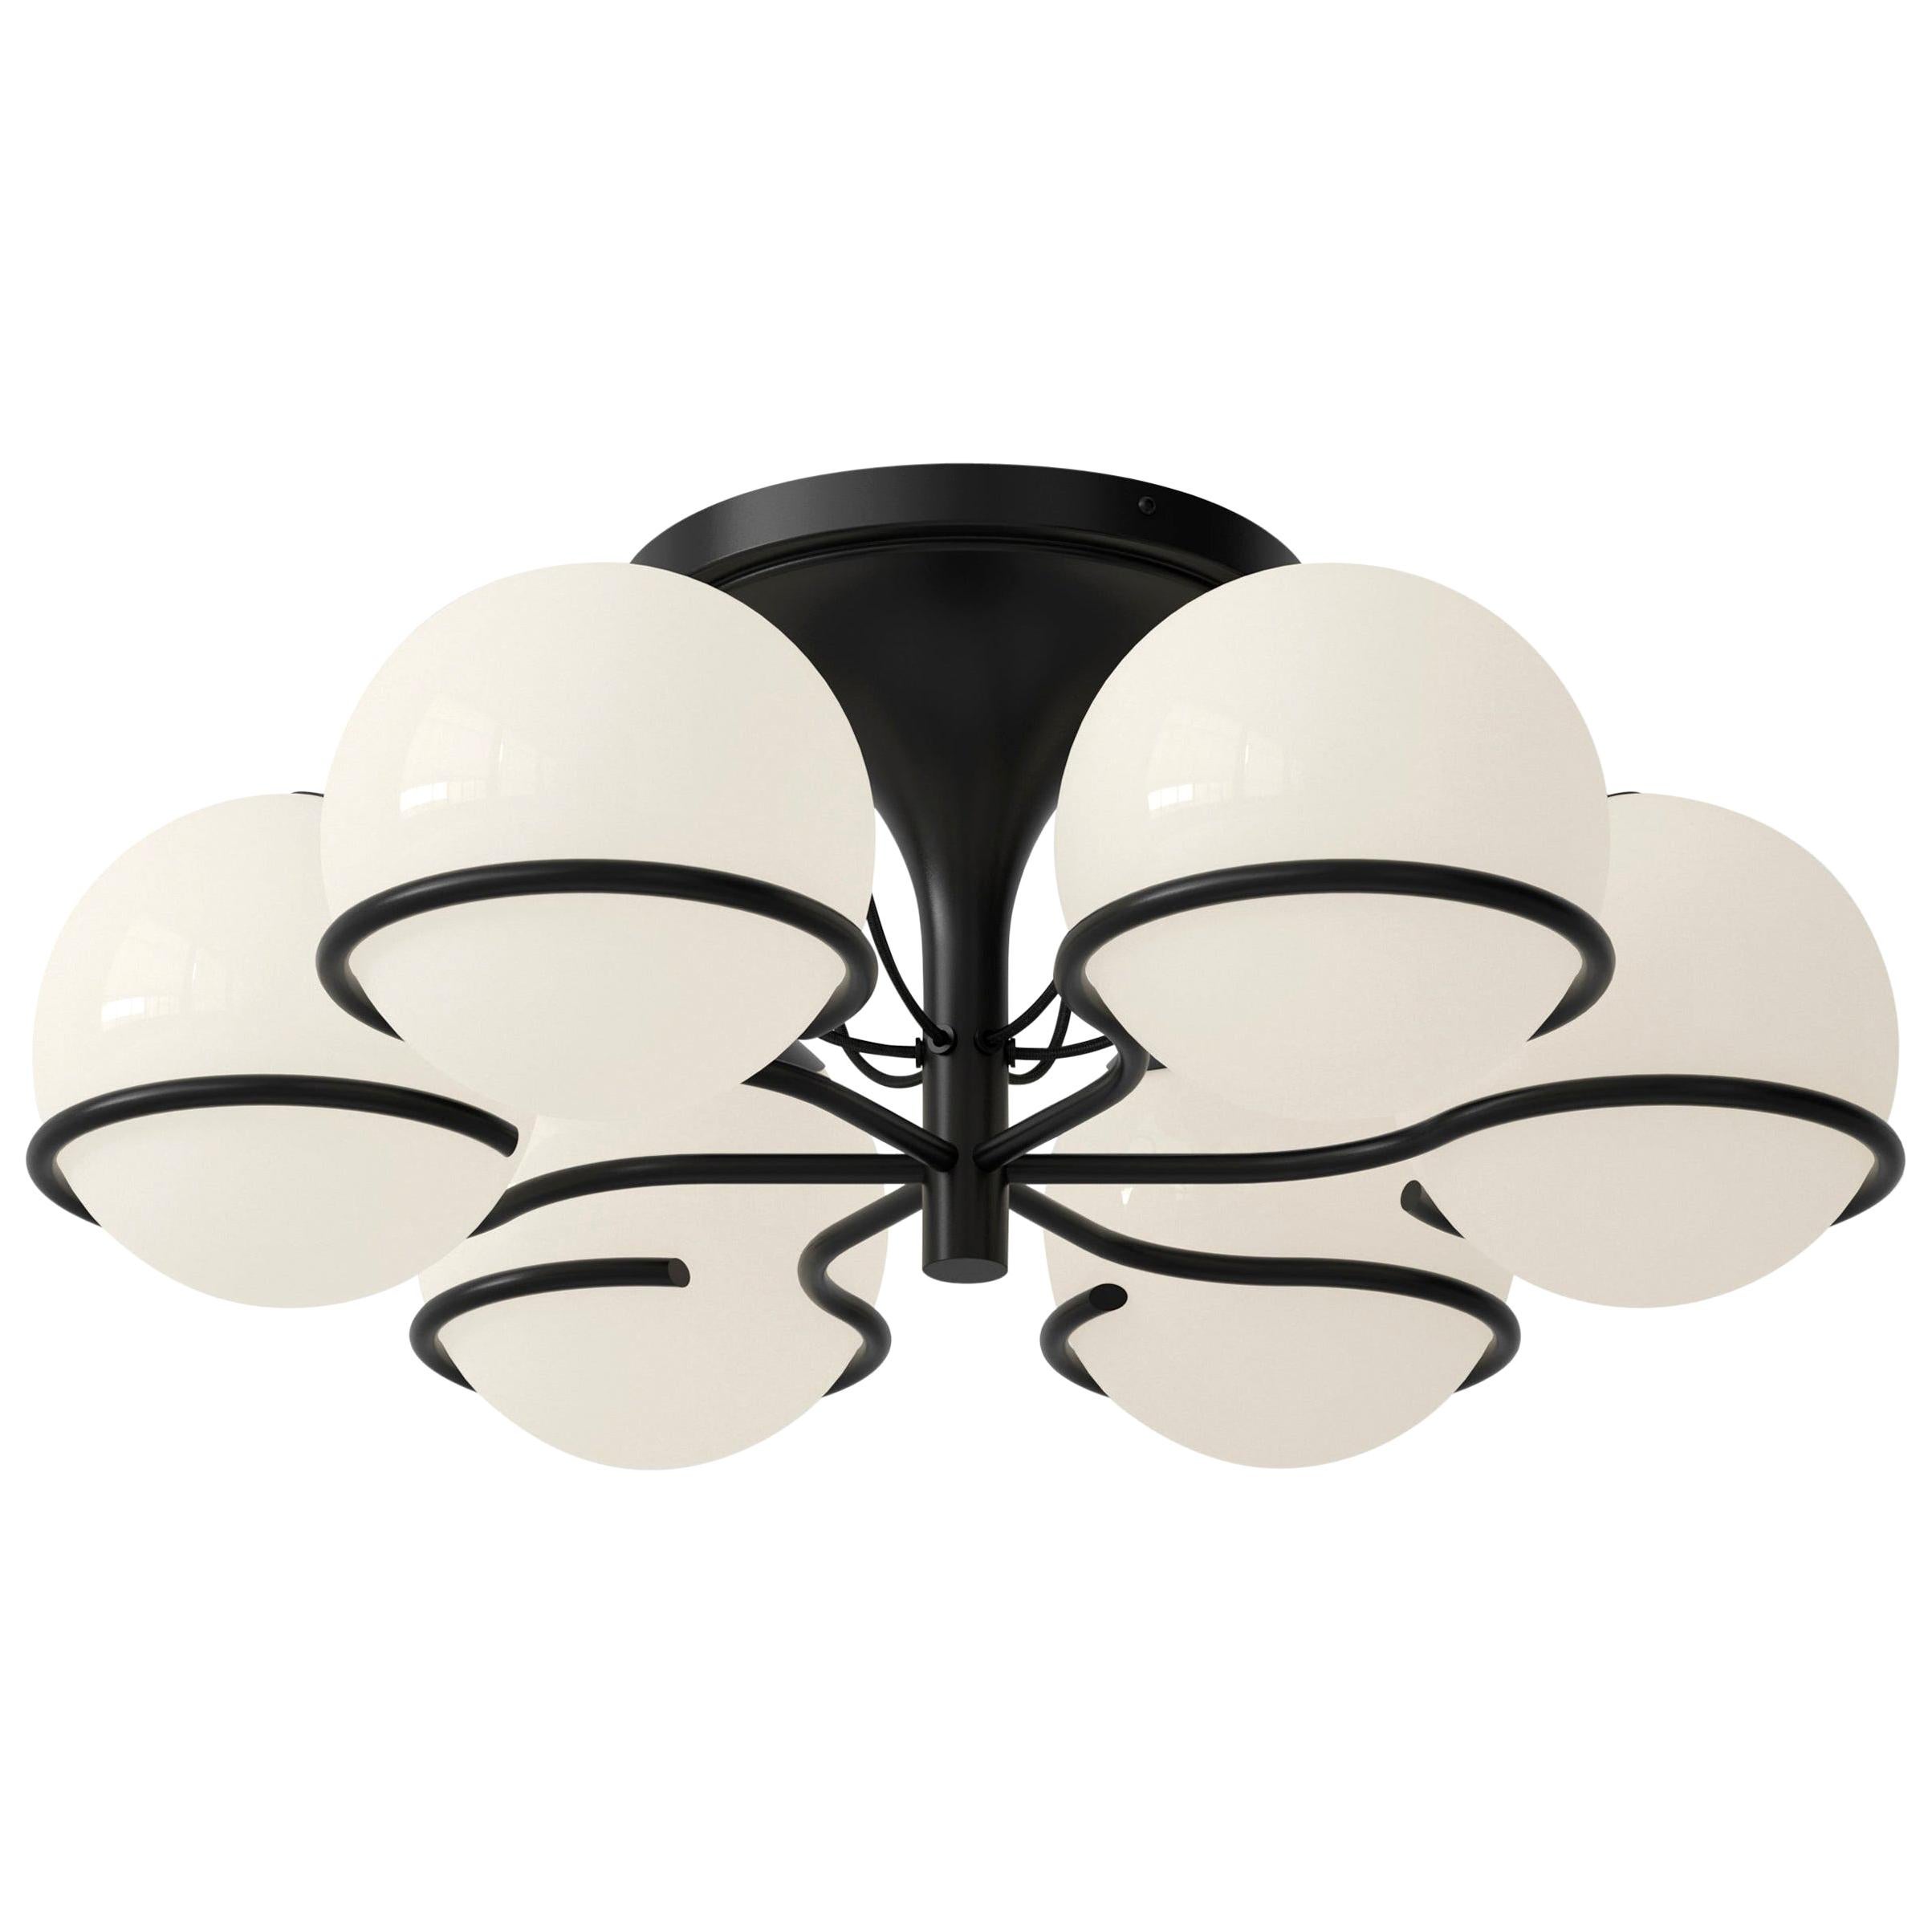 Gino Sarfatti Model 2042/3 Opaline Glass Ceiling Light in Black for Astep For Sale 2